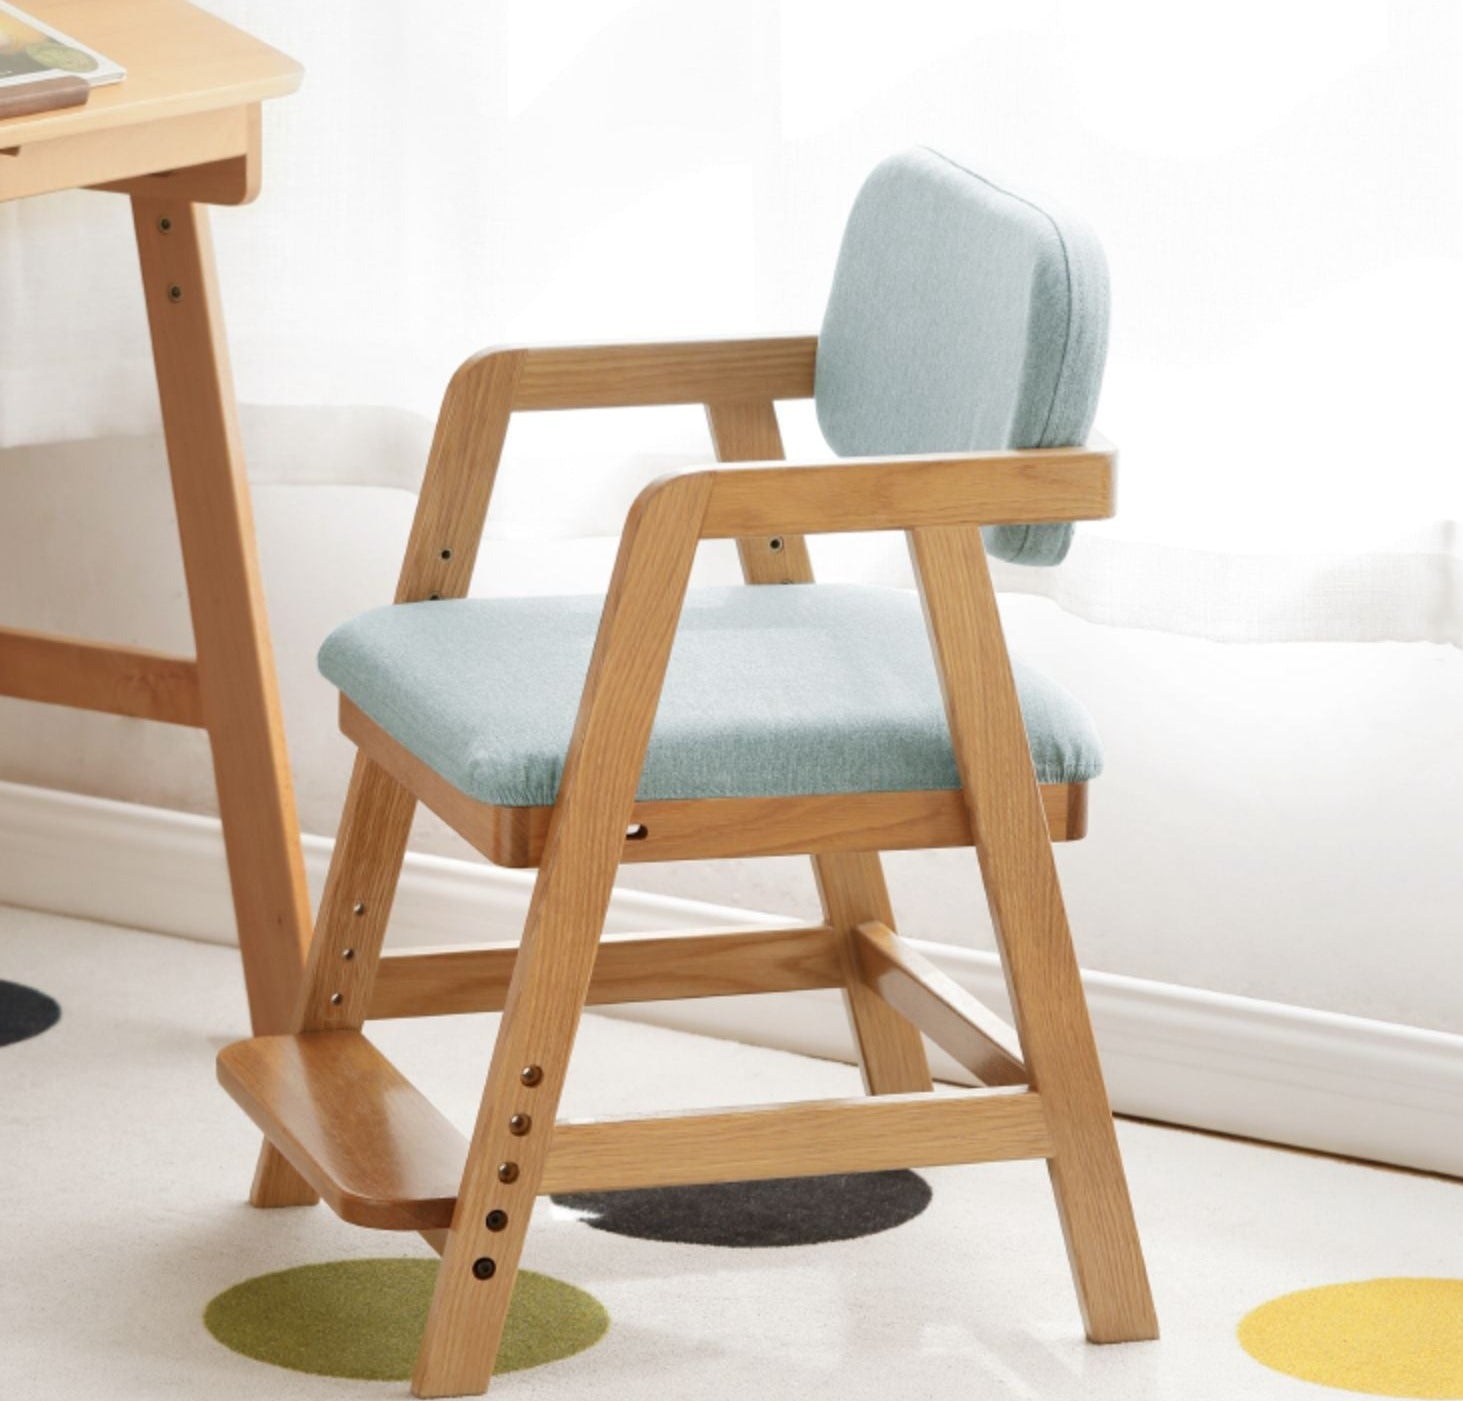 Adjustable height kids soft chair oak solid wood"